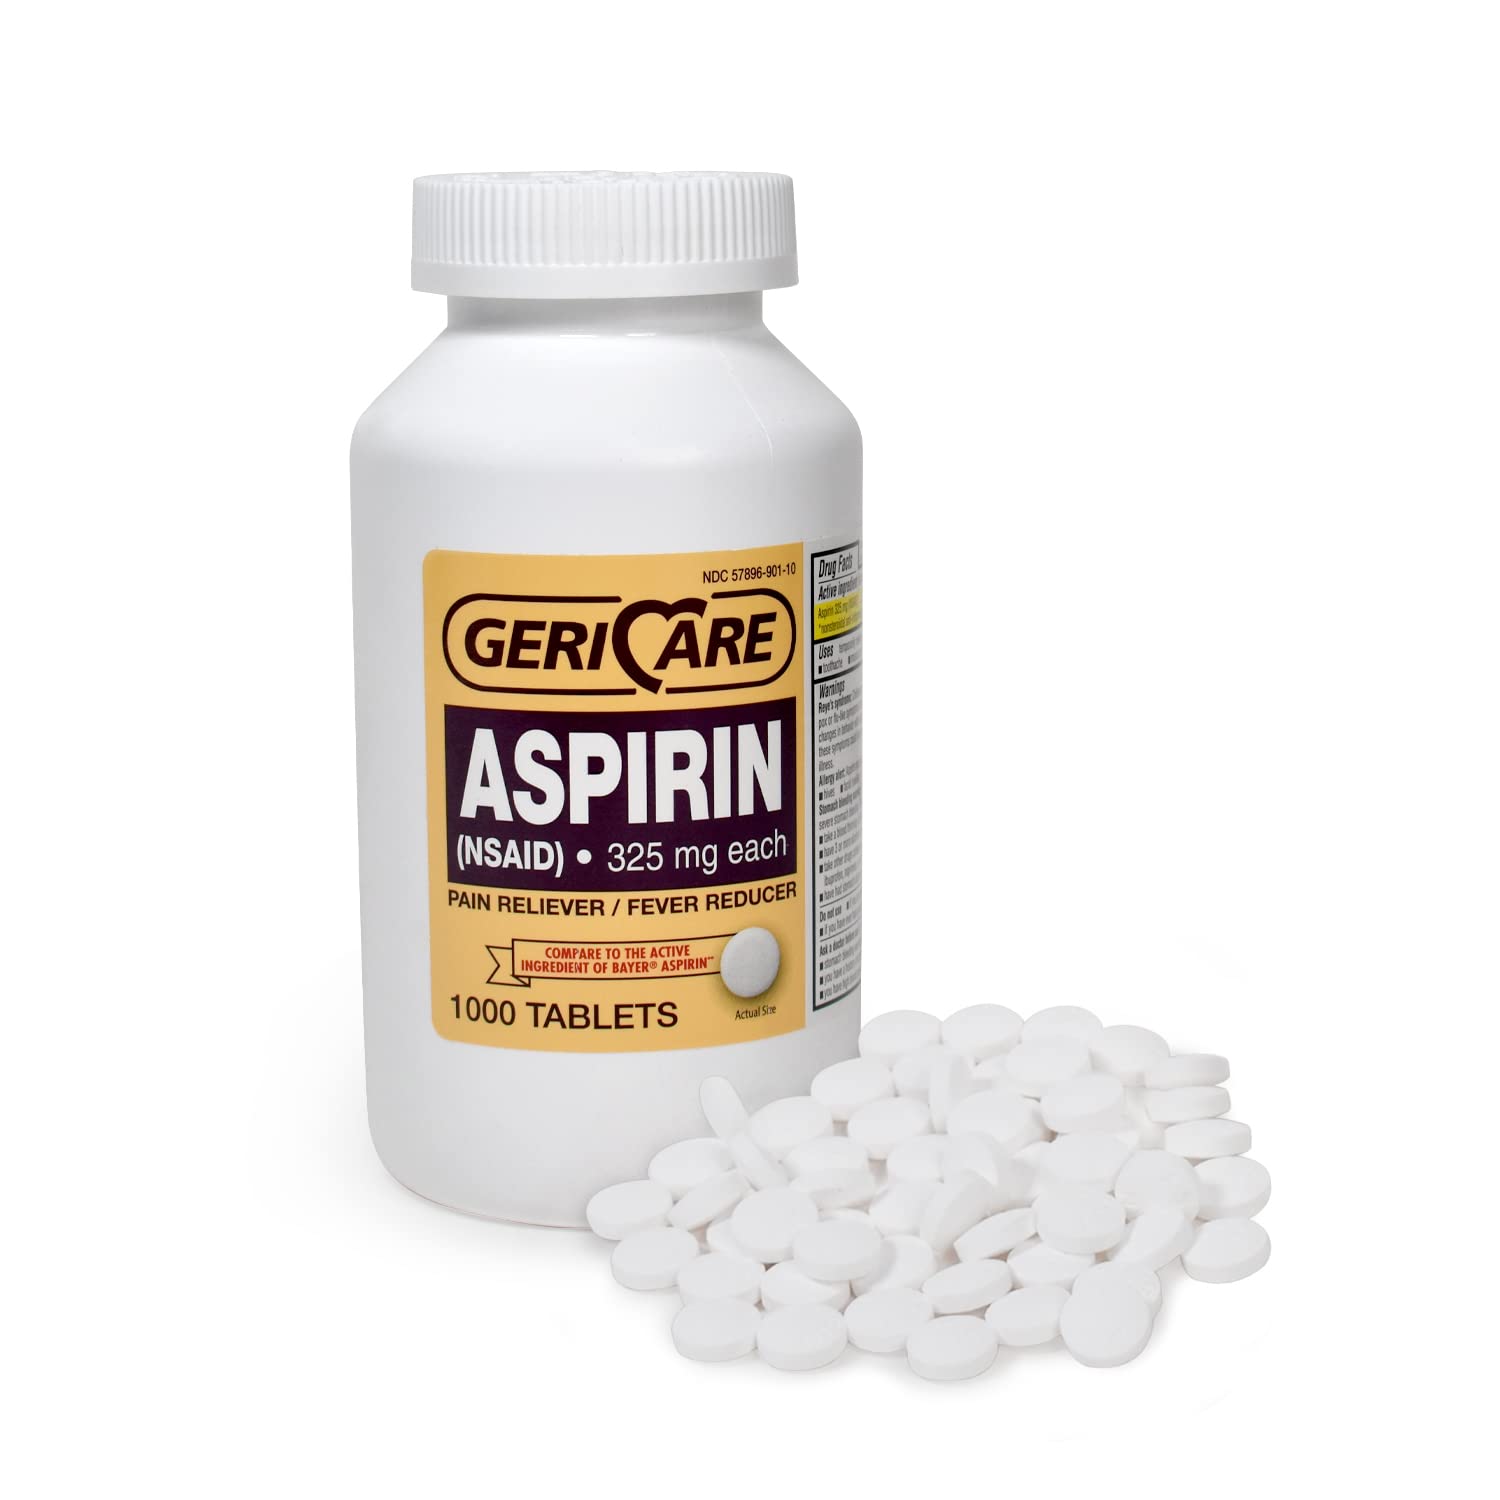 GeriCare Aspirin Tablets 325mg - Pain Reliever And Fever Reducer Uncoated Aspirins For Adults & Kids 12+ (NSAID) Great For Headache, Toothache, Arthritis, Menstrual & Muscle Pain (Bottle of 1,000)